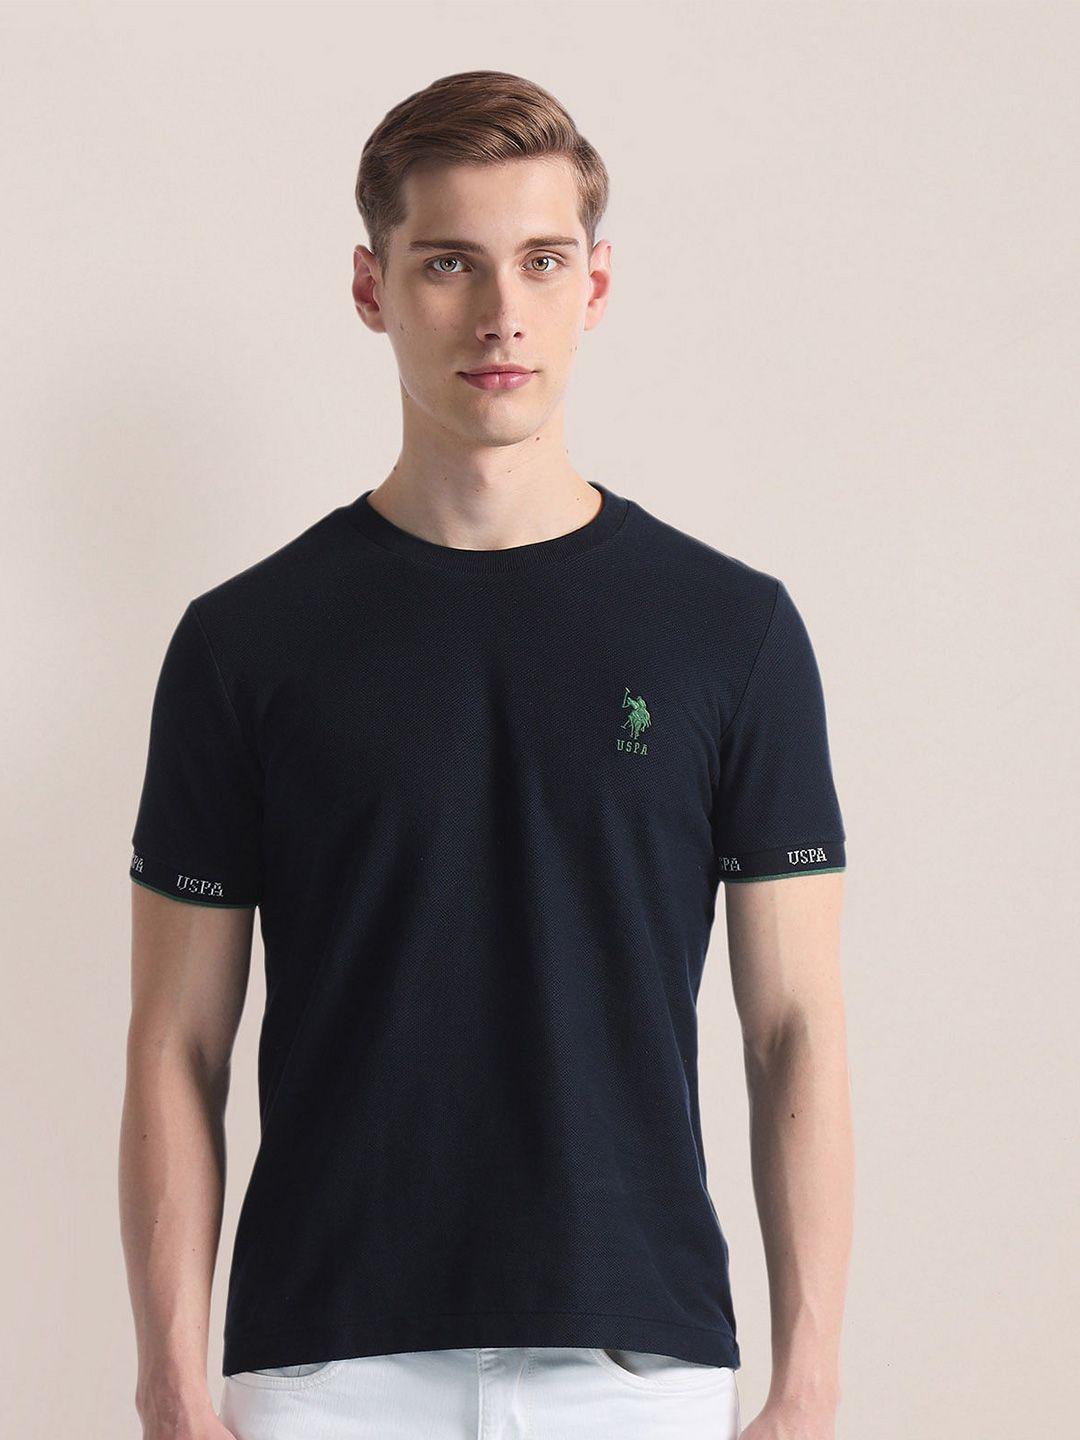 u.s. polo assn. round neck short sleeves slim fit t-shirt